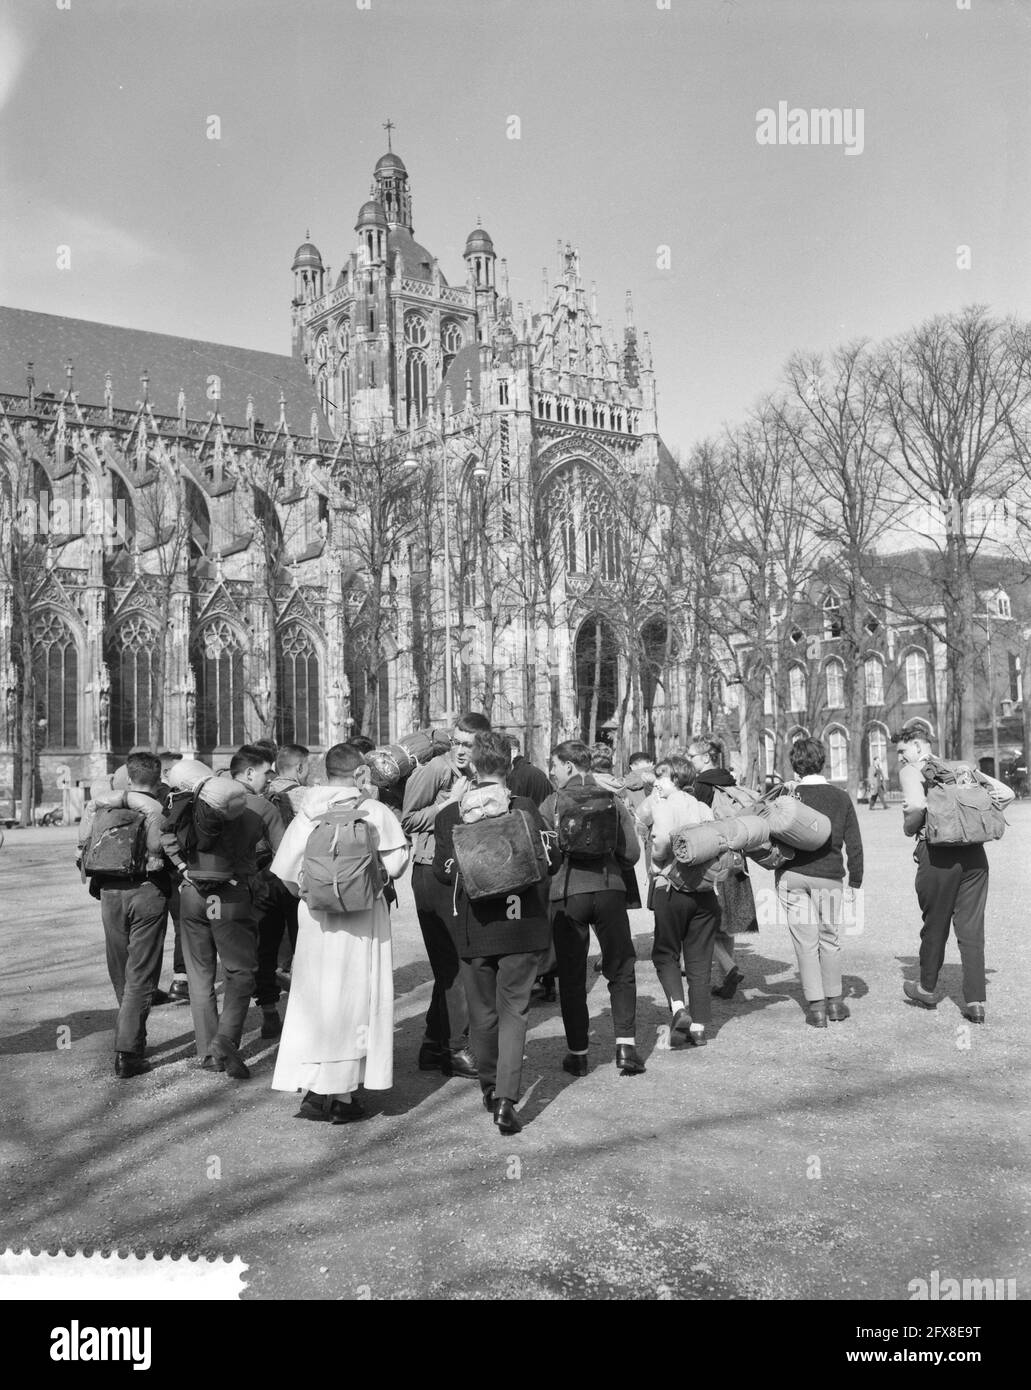 Beginning of the foot march Pax Christi at Den Bosch . Gathering place at the parade of the 2500 participants, April 6, 1961, Foot marches, participants, parades, gathering places, The Netherlands, 20th century press agency photo, news to remember, documentary, historic photography 1945-1990, visual stories, human history of the Twentieth Century, capturing moments in time Stock Photo